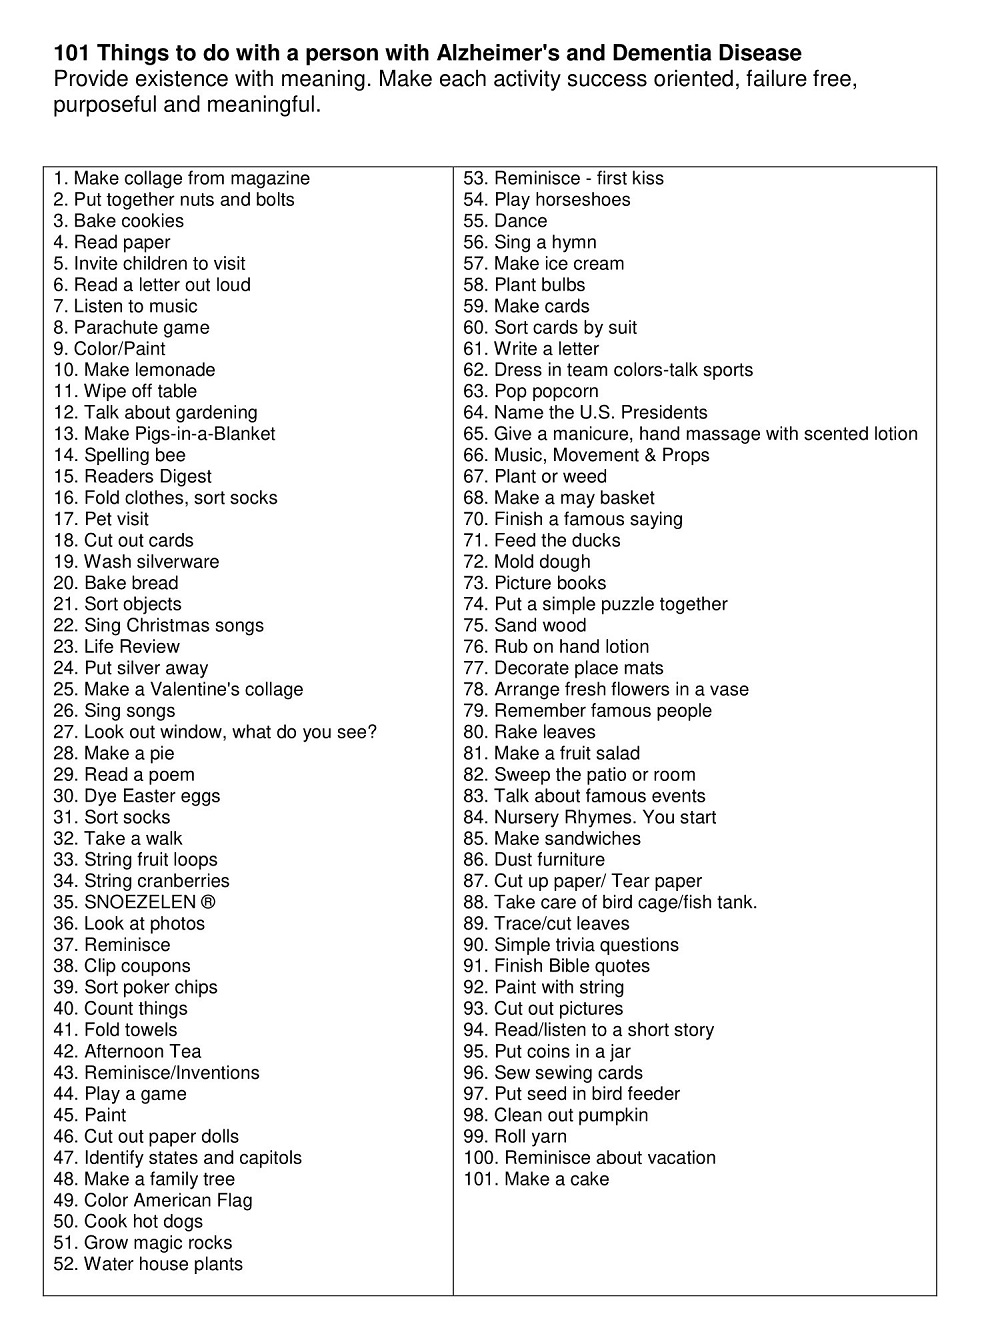 101 Things To Do With Resident With Dementia